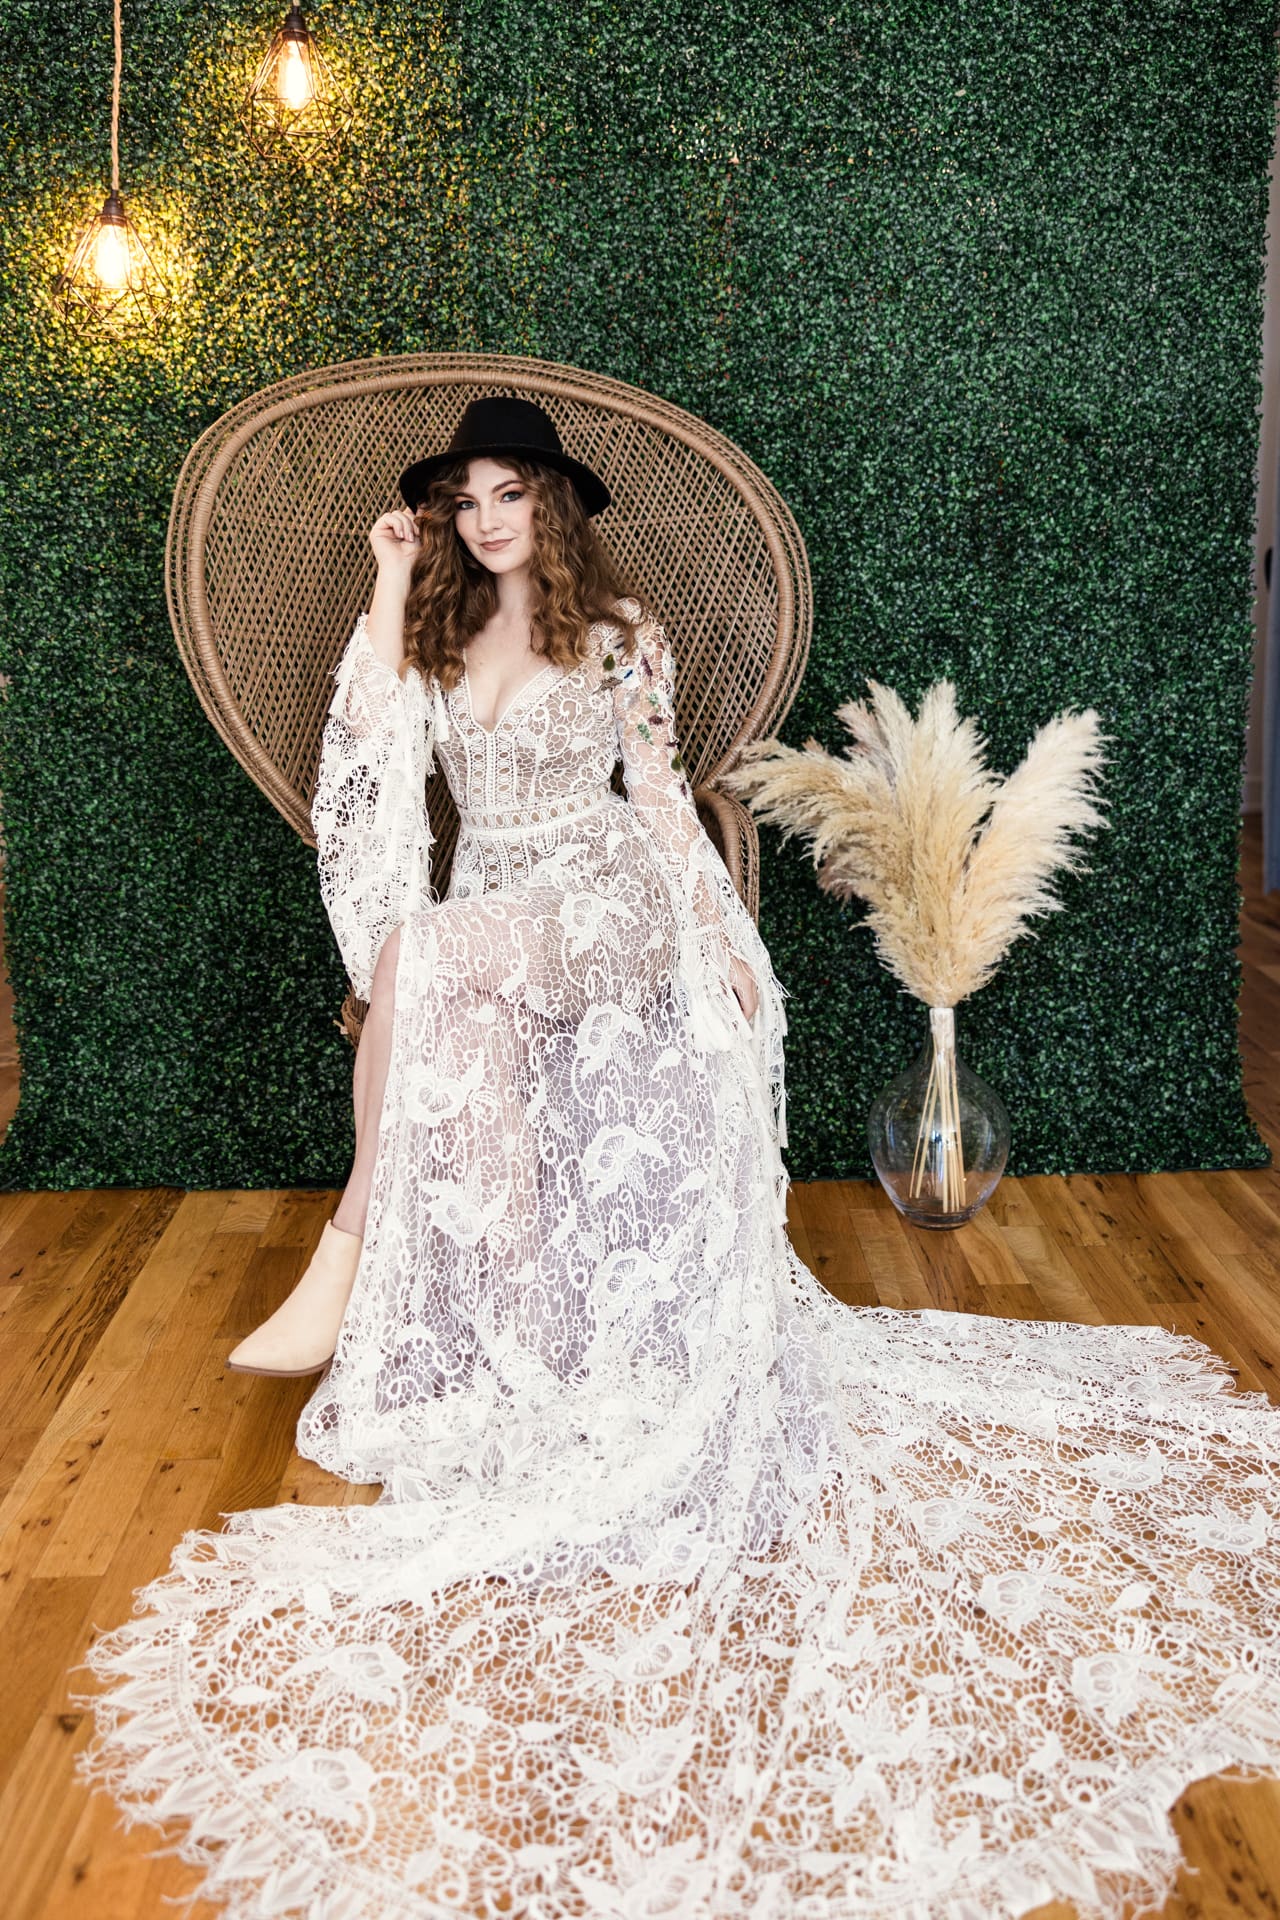 Model wearing long white lace dress and black fedora sits in wicker chair in front of greenery wall with pampas grass during fashion photoshoot at Chicago photography studio P&M Studio